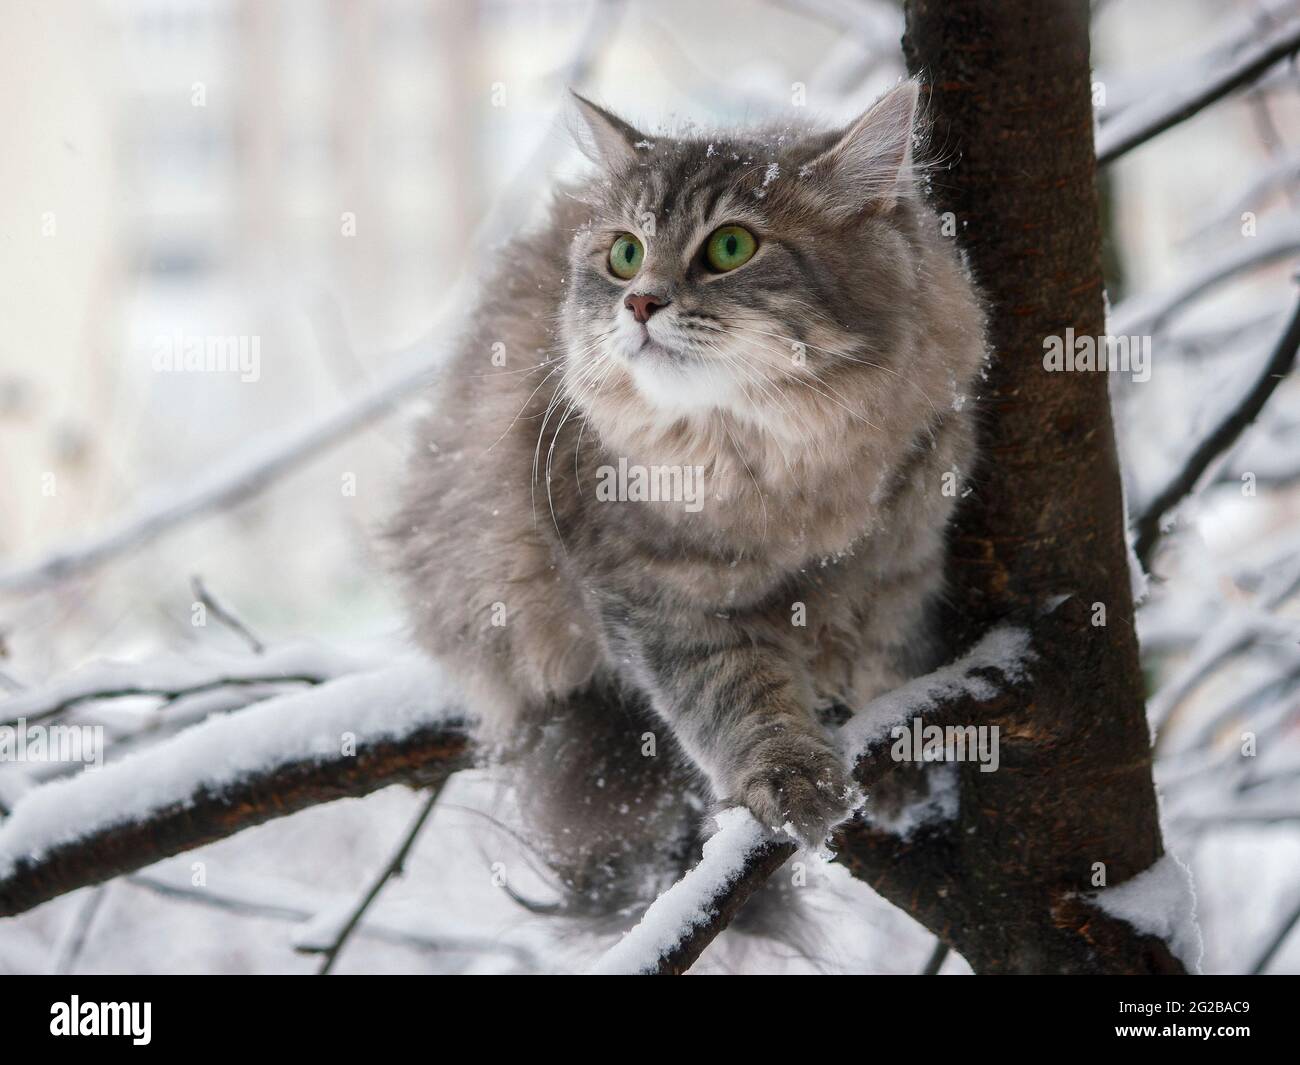 Winter walk in the snow of a curious cat Stock Photo